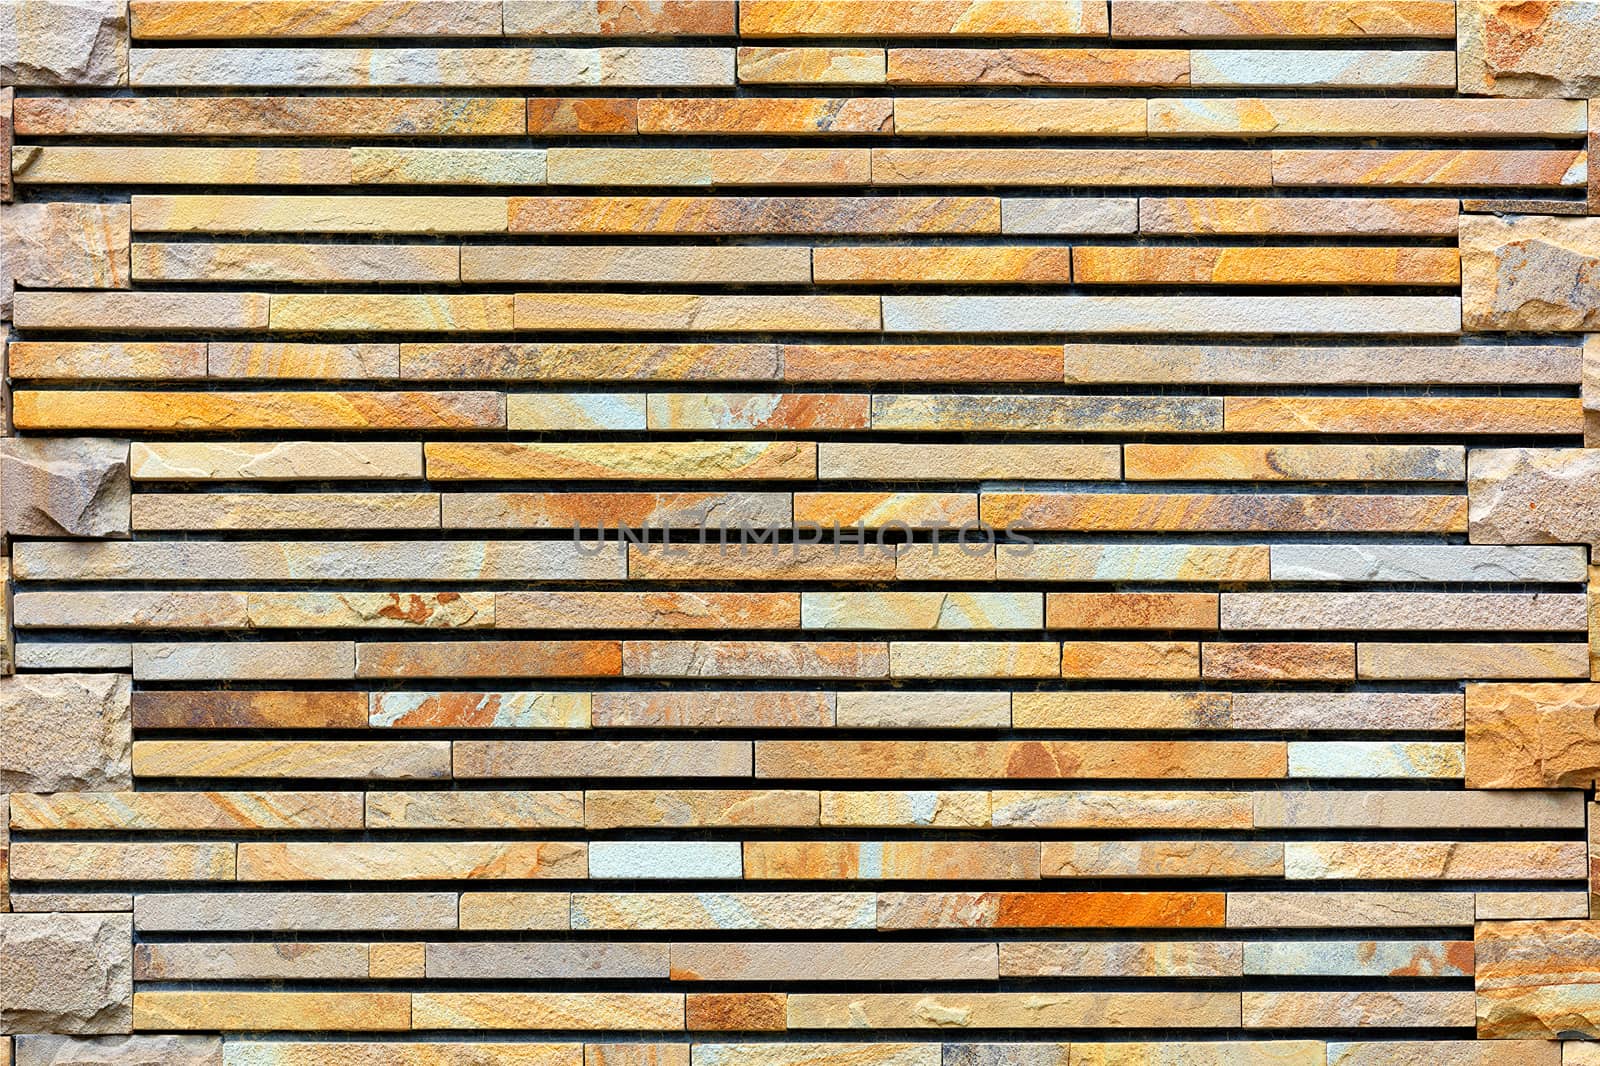 A stone wall made of pieces of machined flat golden sandstone. by Sergii